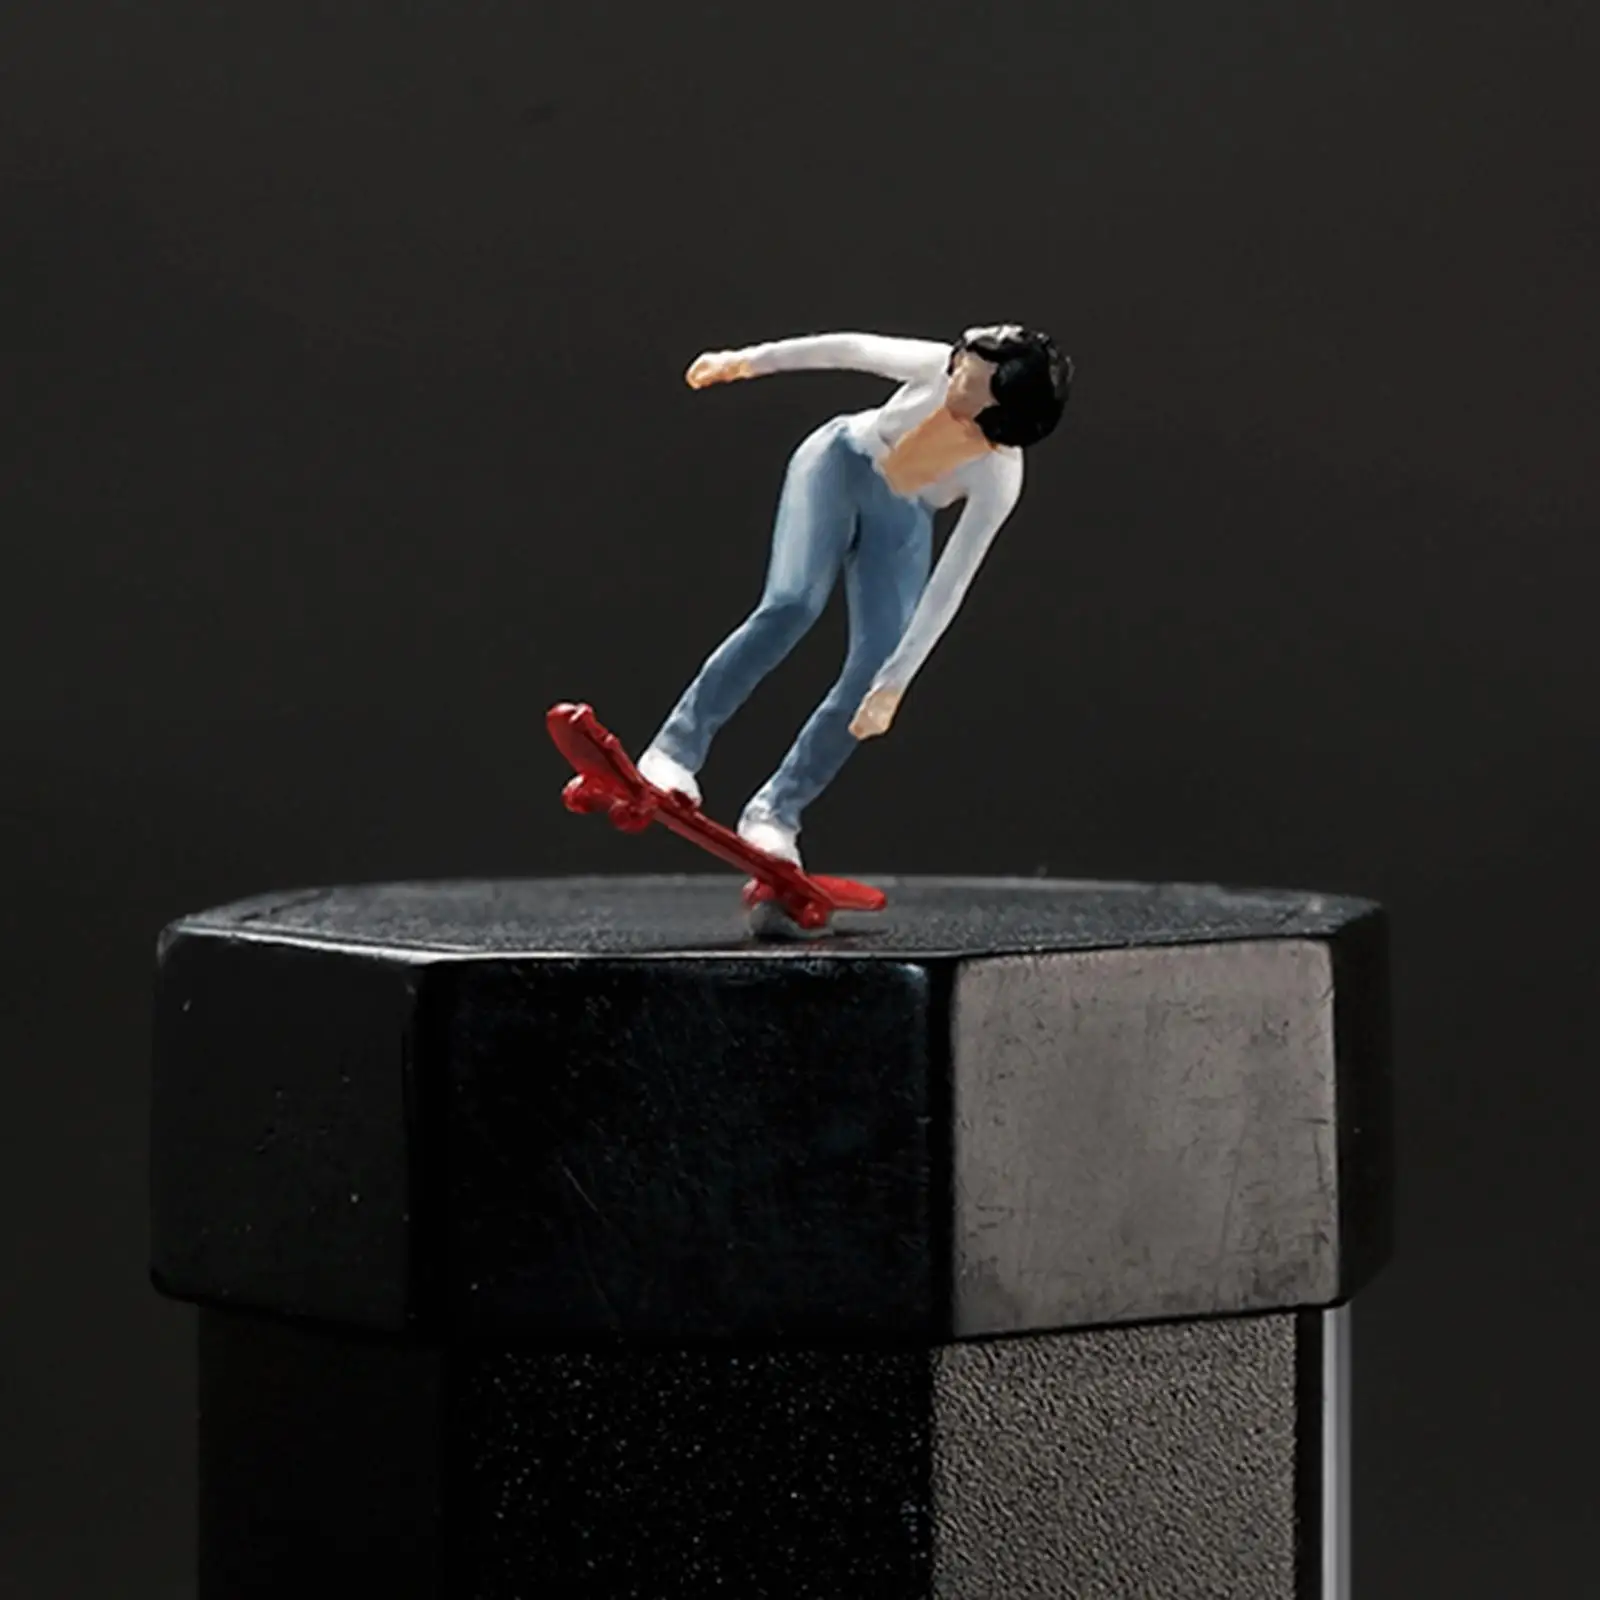 1/64 Scale Miniature Figure Painted Doll Toy Skateboard Women for Dollhouse Accessories DIY Projects Model Building Kits Railway